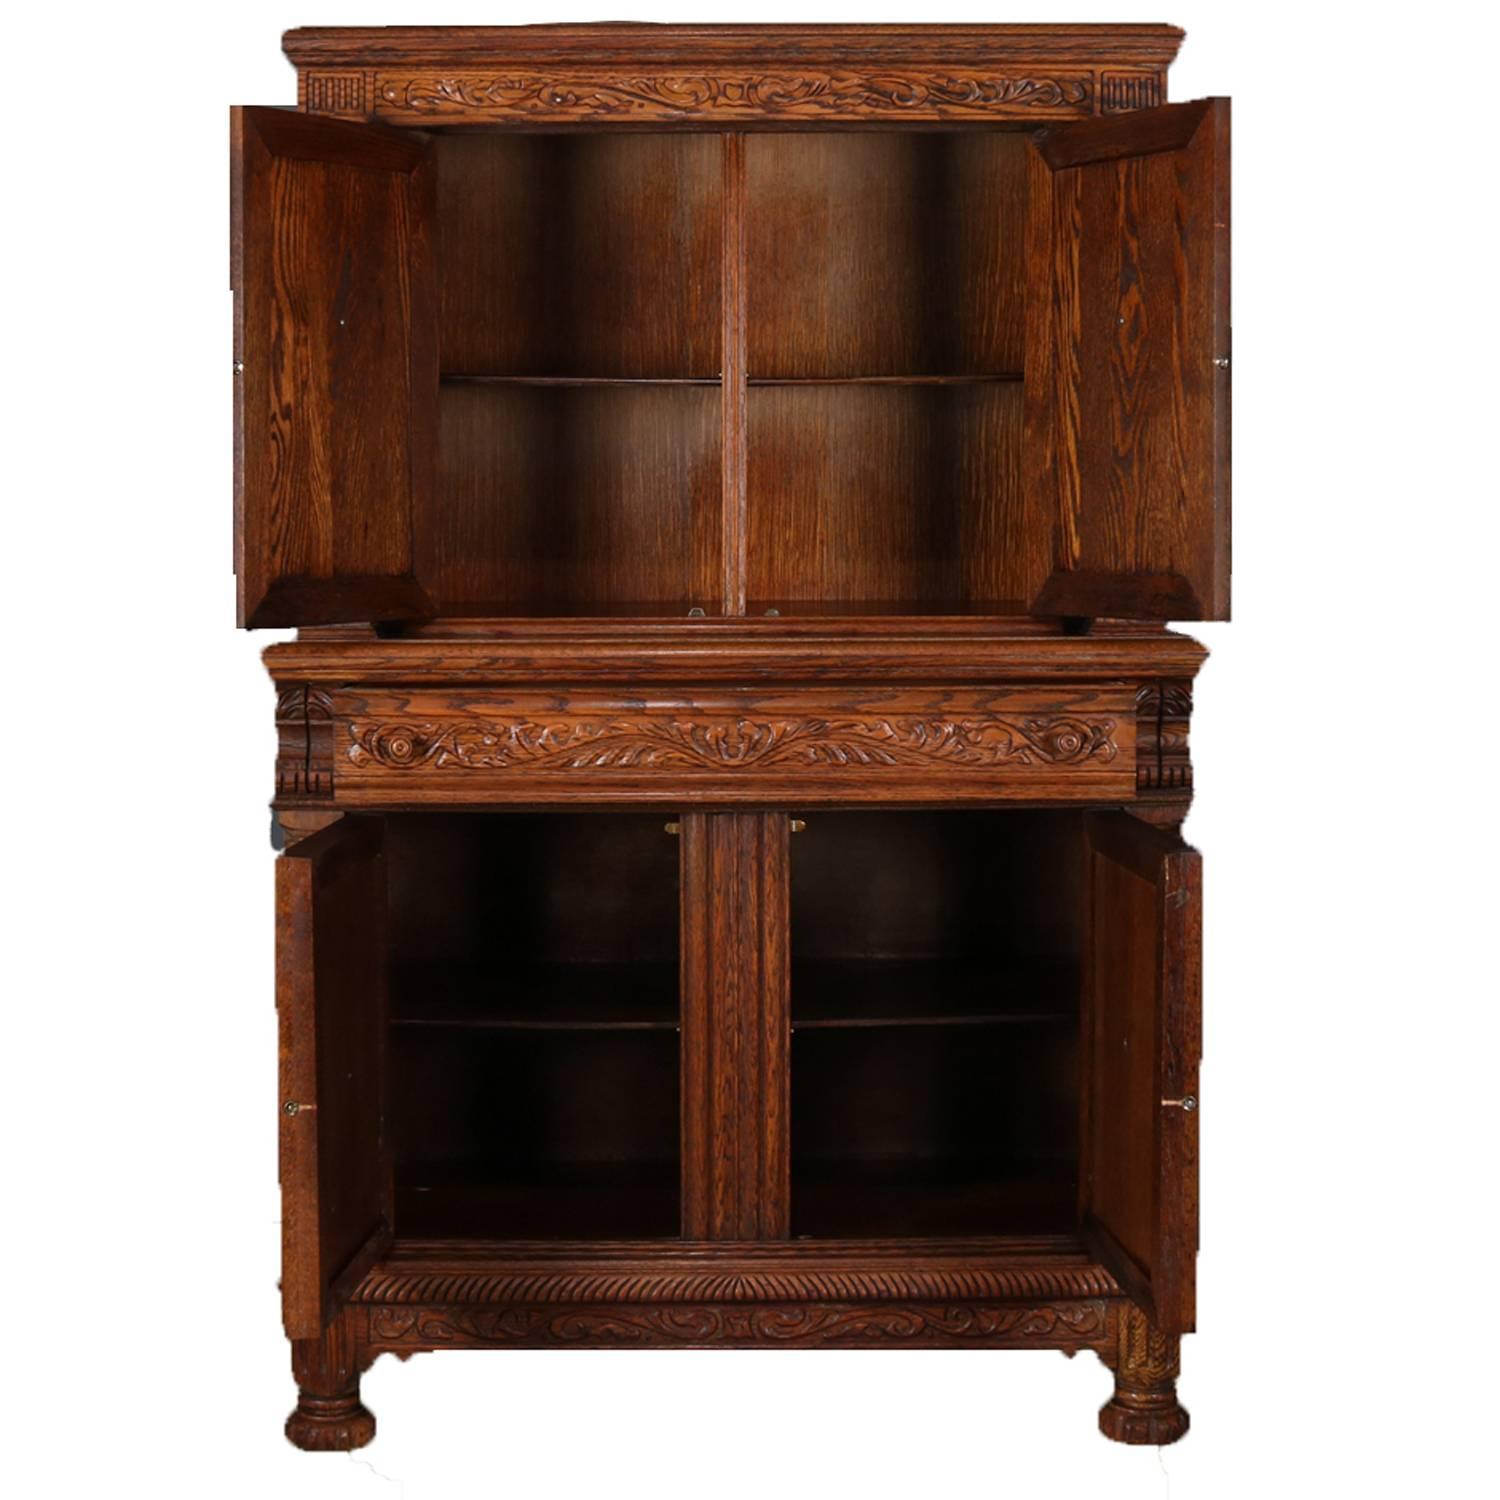 Carved oak Jacobean step back cupboard features upper cabinet having doors with heavily carved scroll and foliate motif and bookmatched insets flanked by barley twist columns, lower cabinet having arched panels with bookmatched burl and framed with